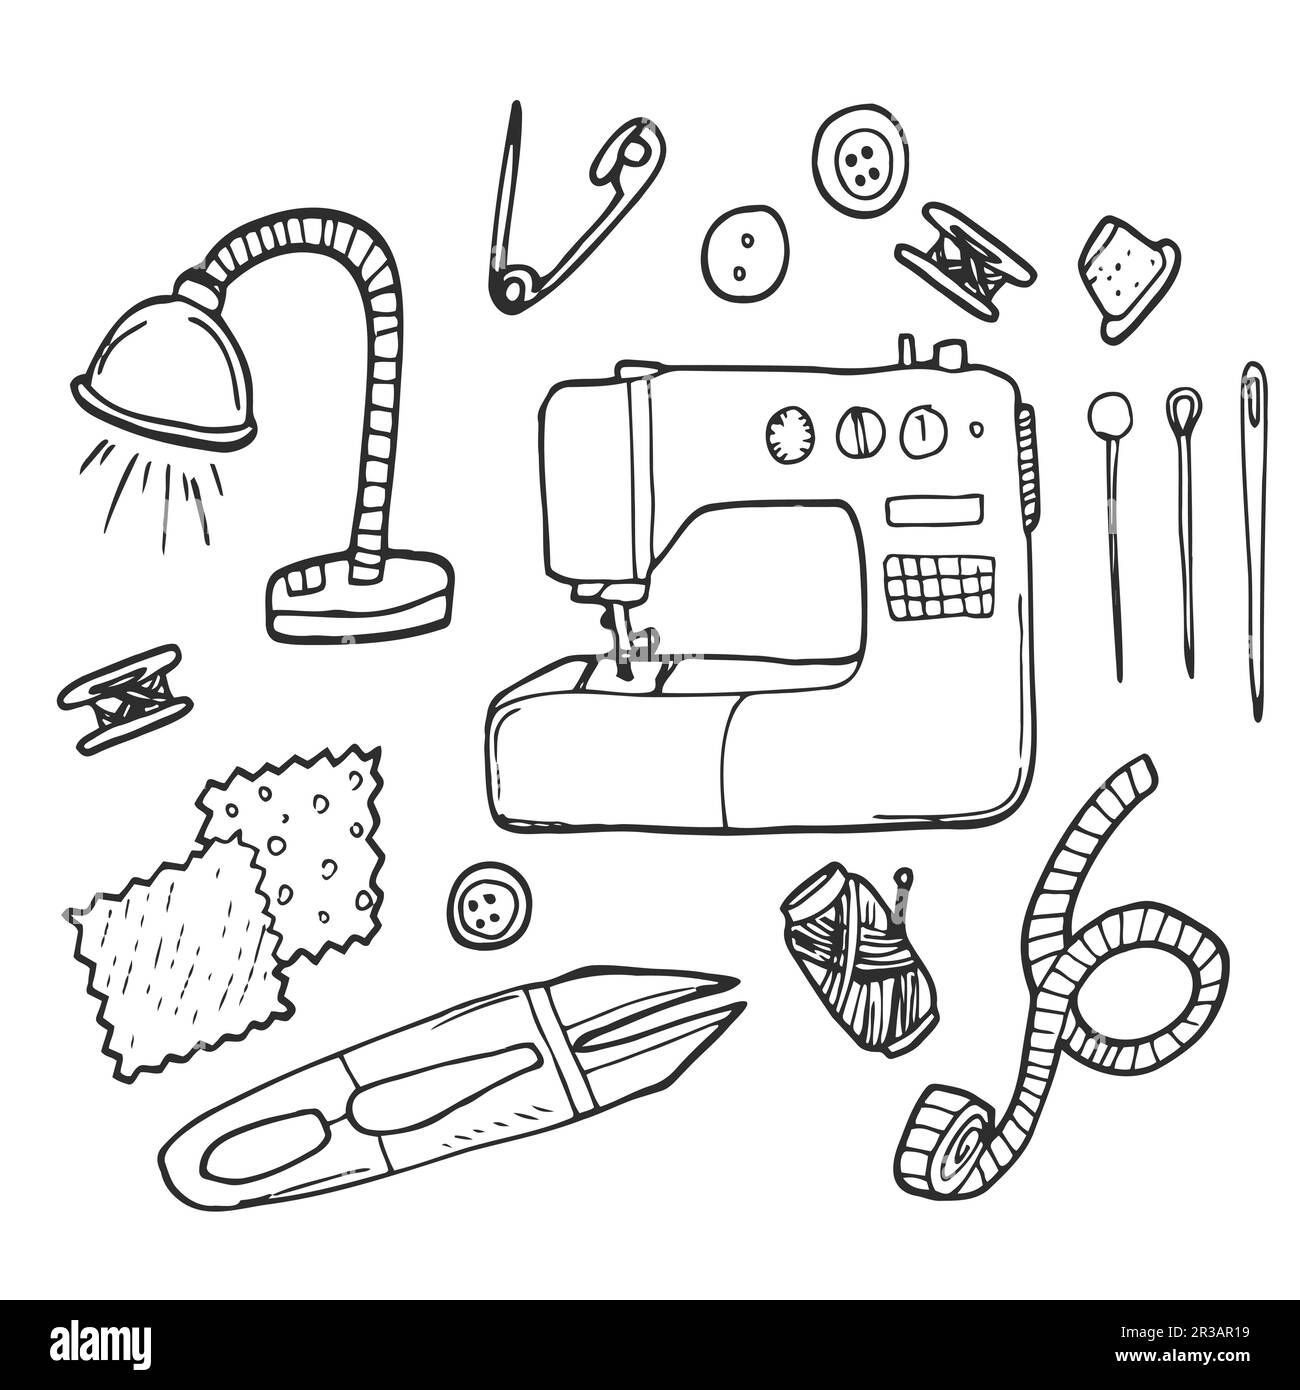 Vector graphic set of hand drawn sewing tools. Sewing kit illustration ...